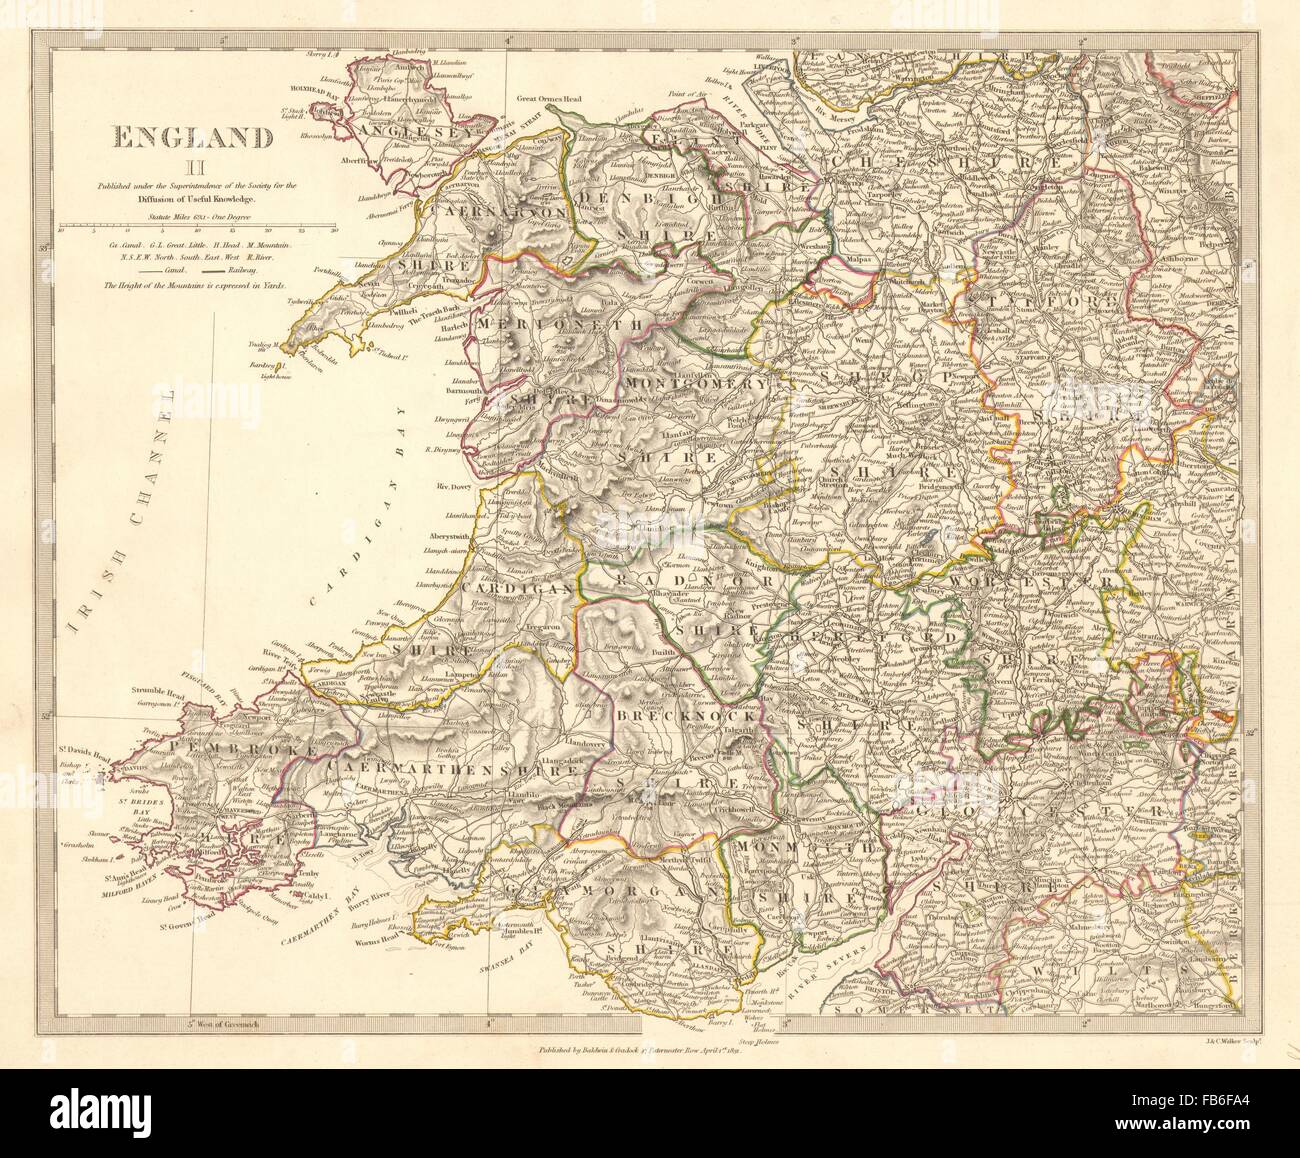 WALES & ENGLAND WEST MIDLANDS: Showing counties. Original colour.SDUK, 1848 map Stock Photo